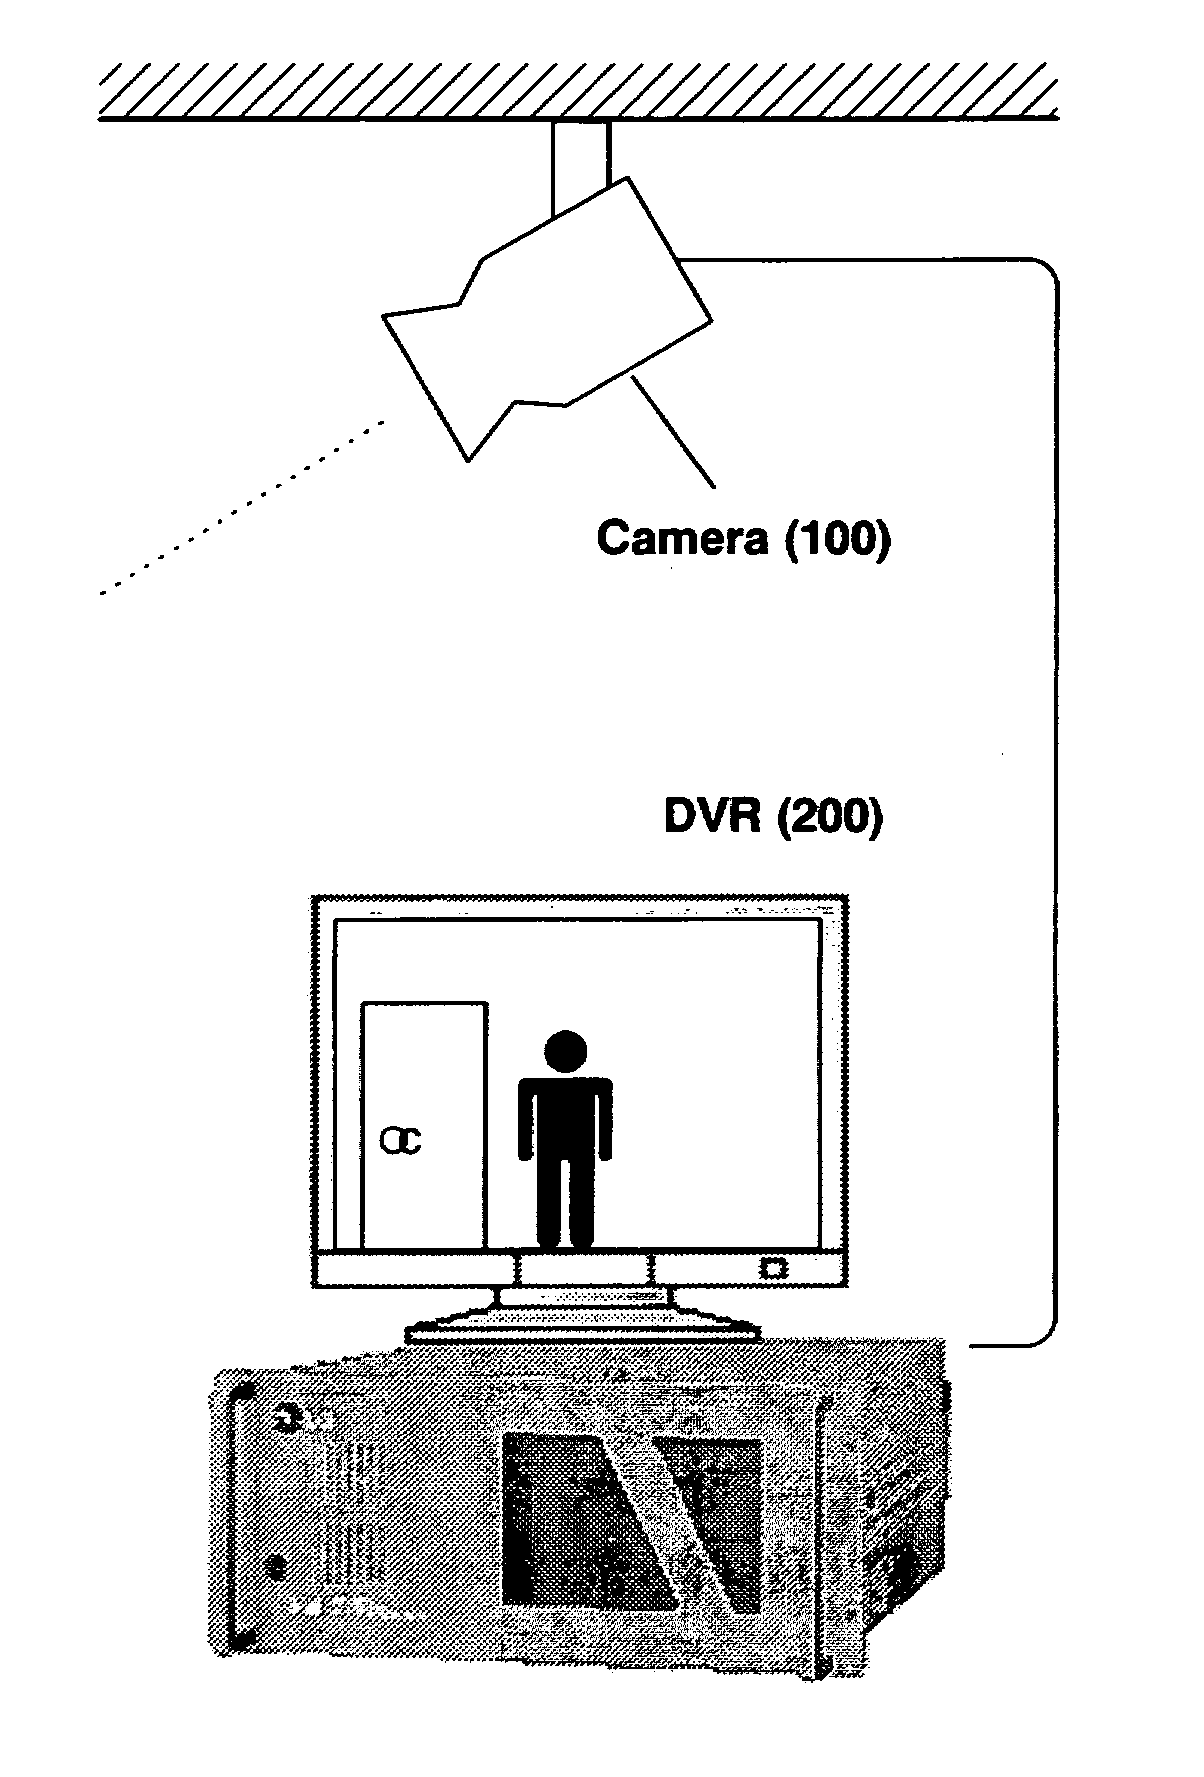 Method of recording and reproducing surveillance images in DVR